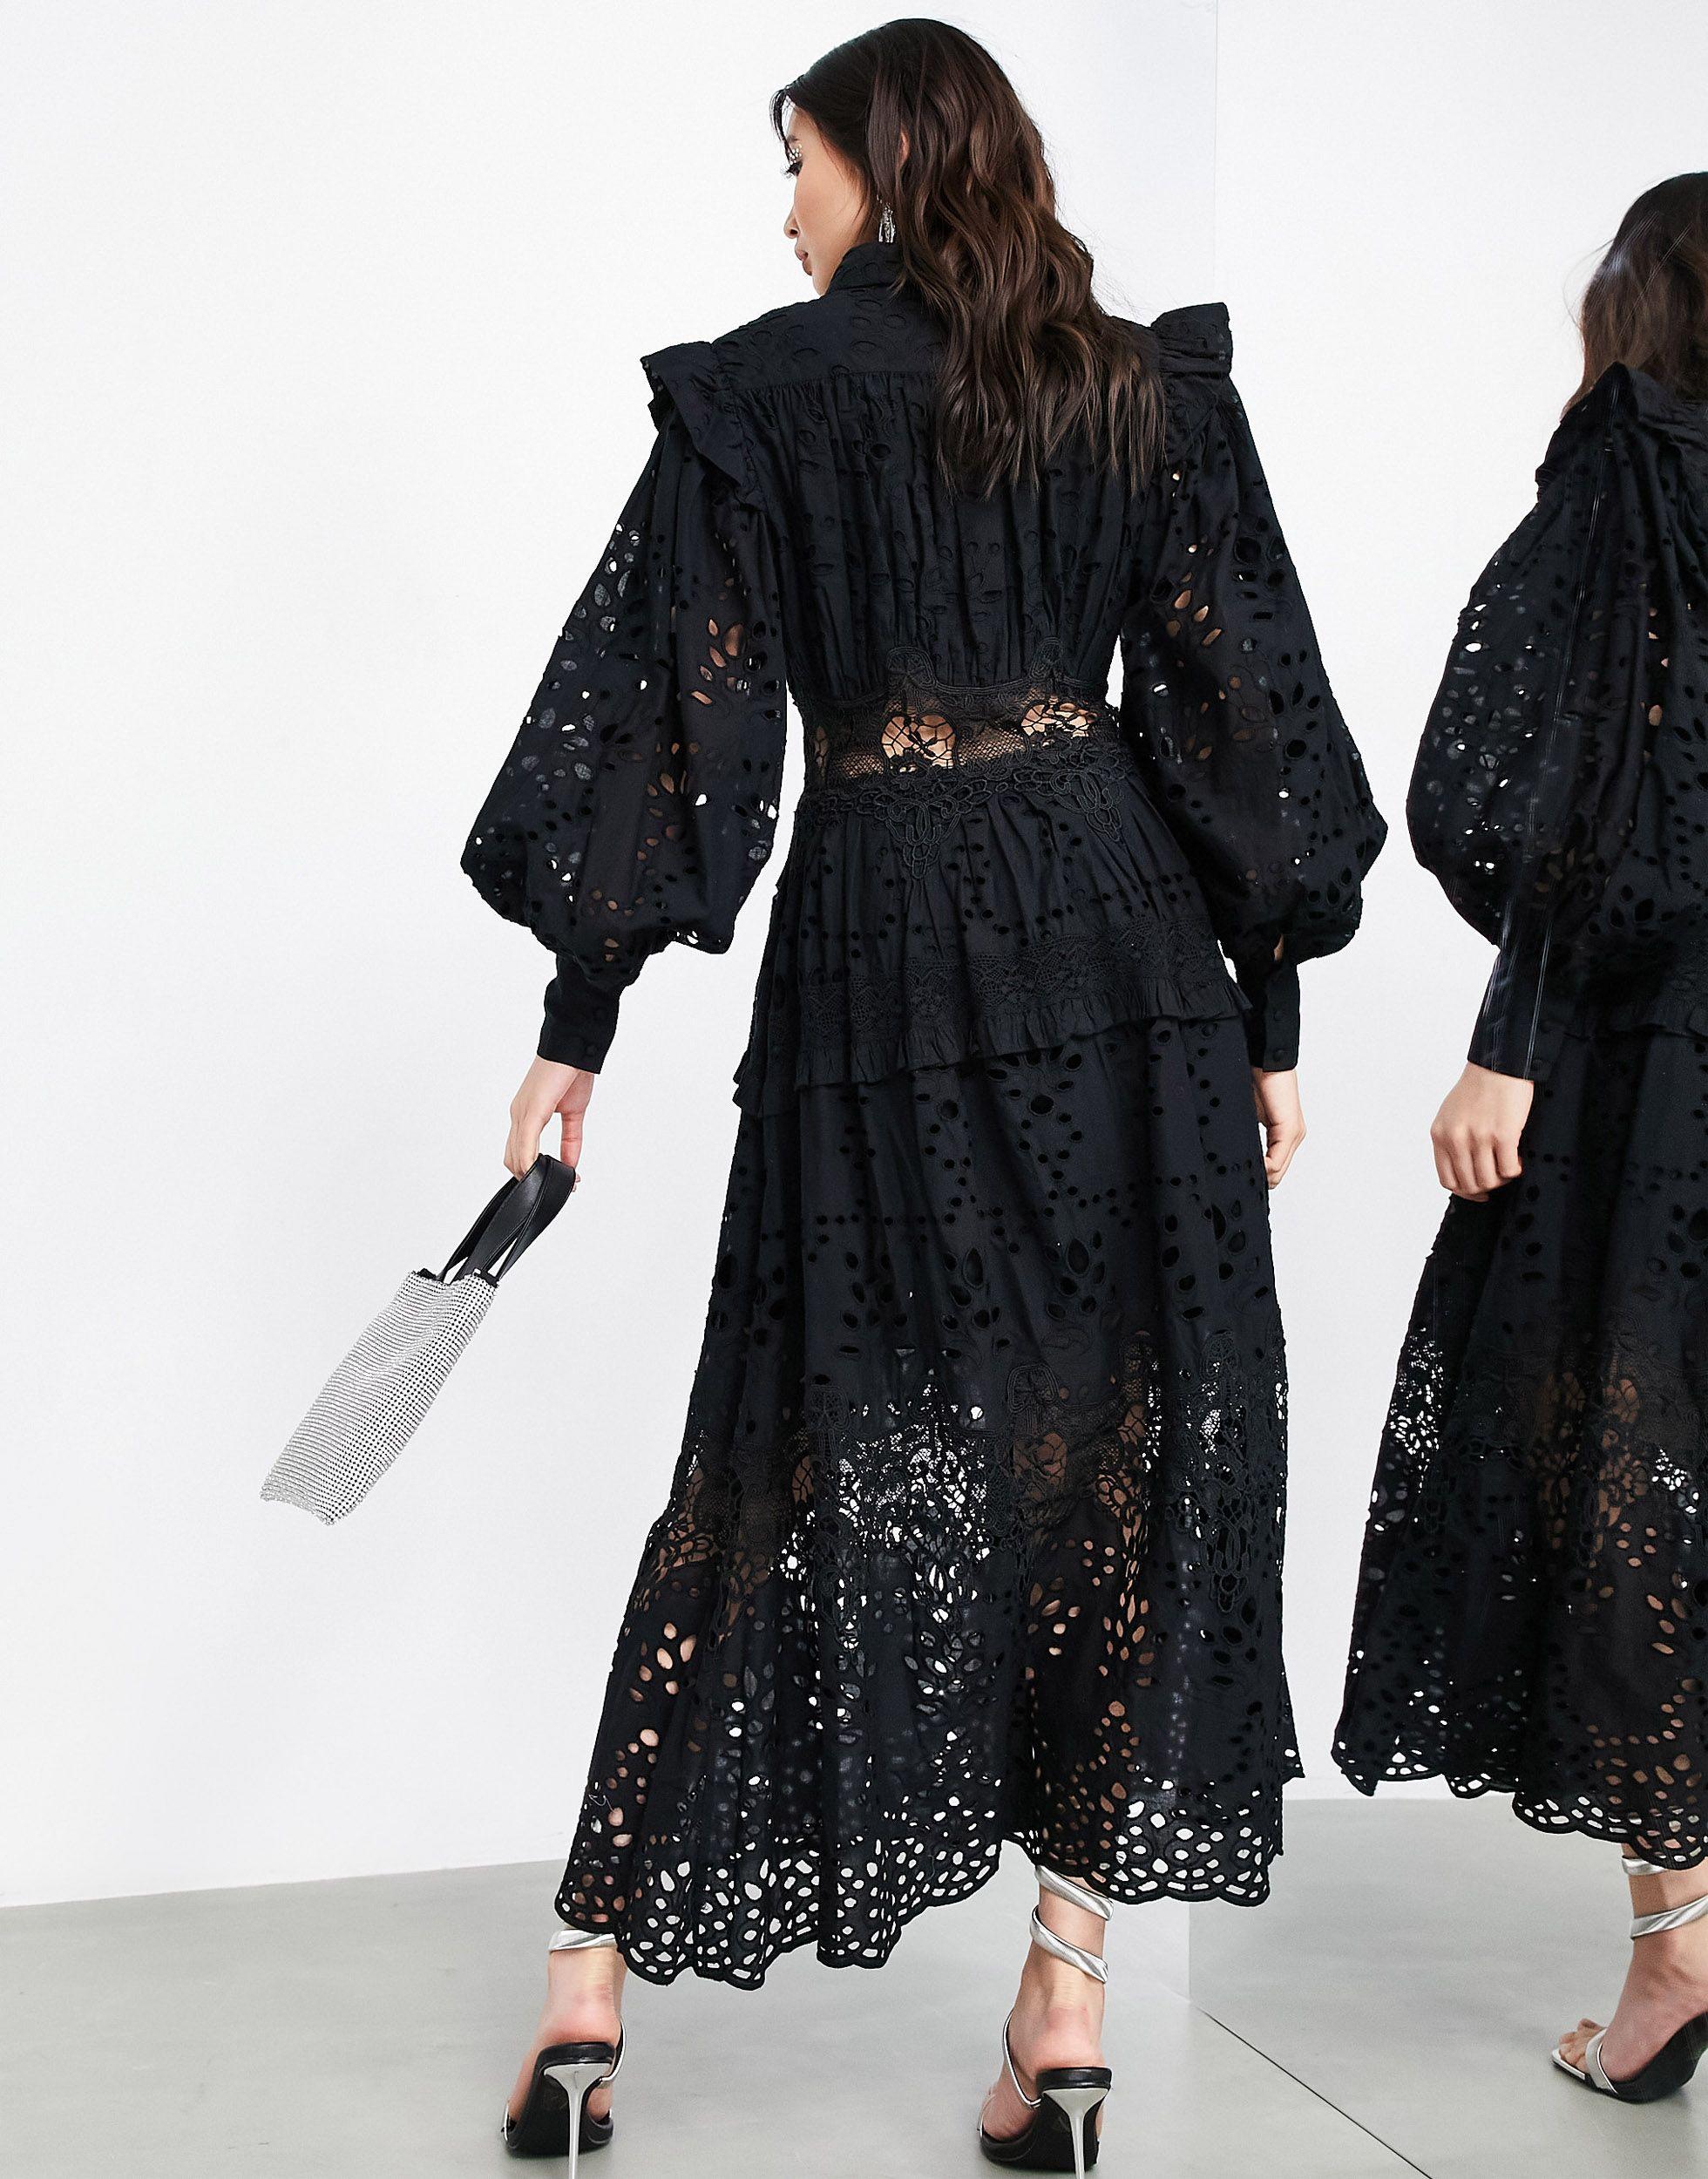 ASOS Lace Broderie Shirt Dress in Black ...